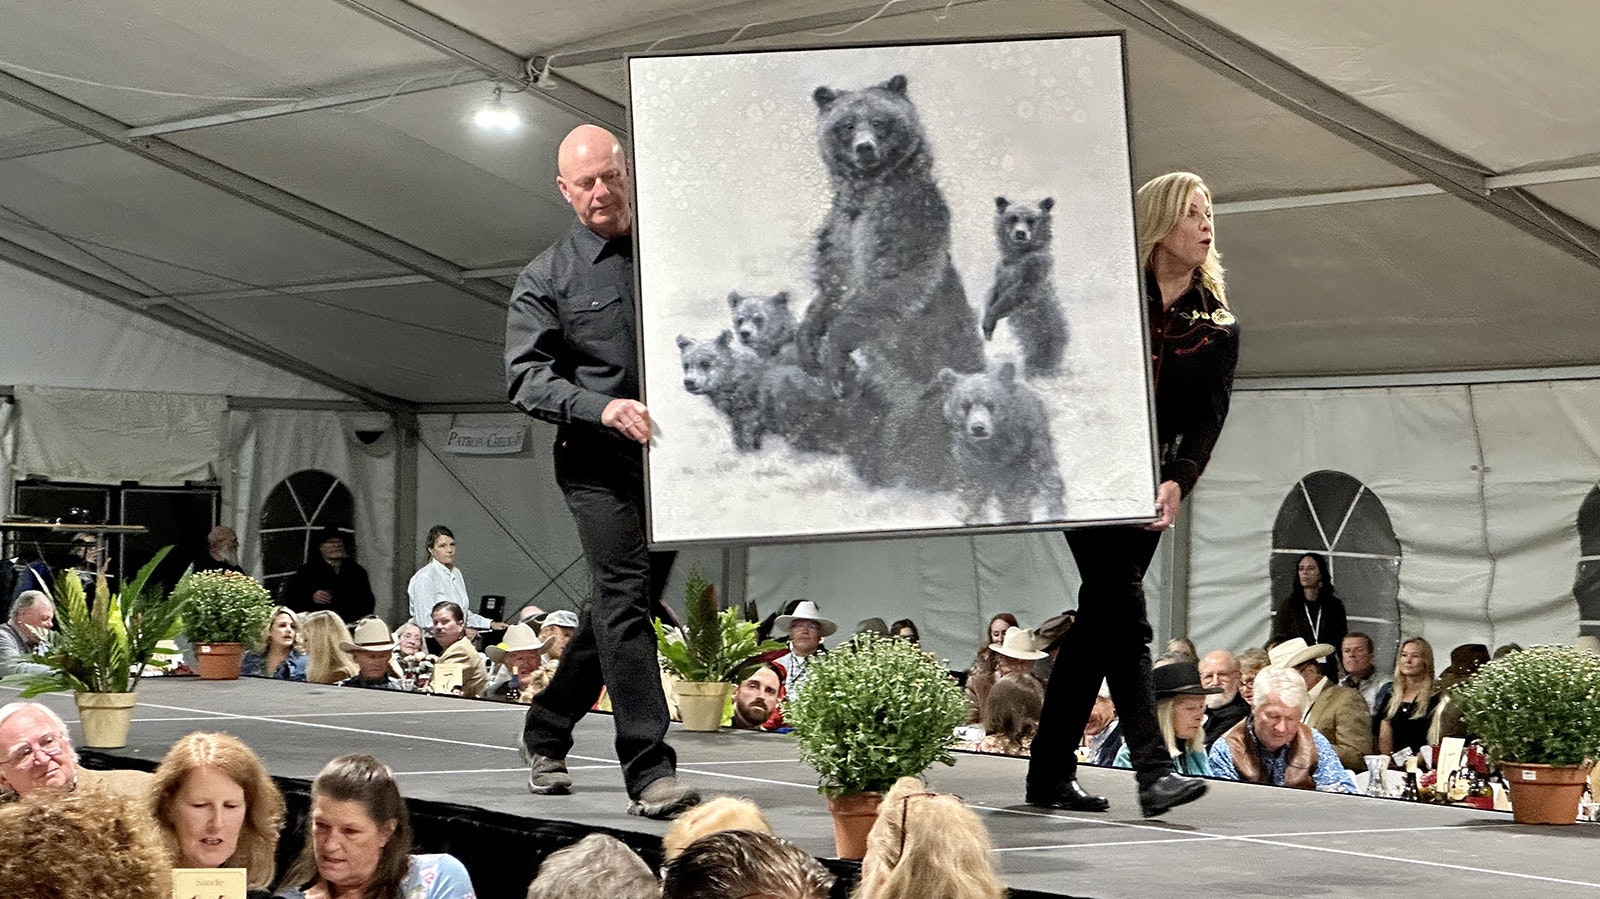 "Maternal," a painting by David Frederick Riley depicting Grizzly 399 and her cubs, makes its way down the runway at the 42nd Buffalo Bill Art Show and Sale Live Auction. The piece sold for $19,500.